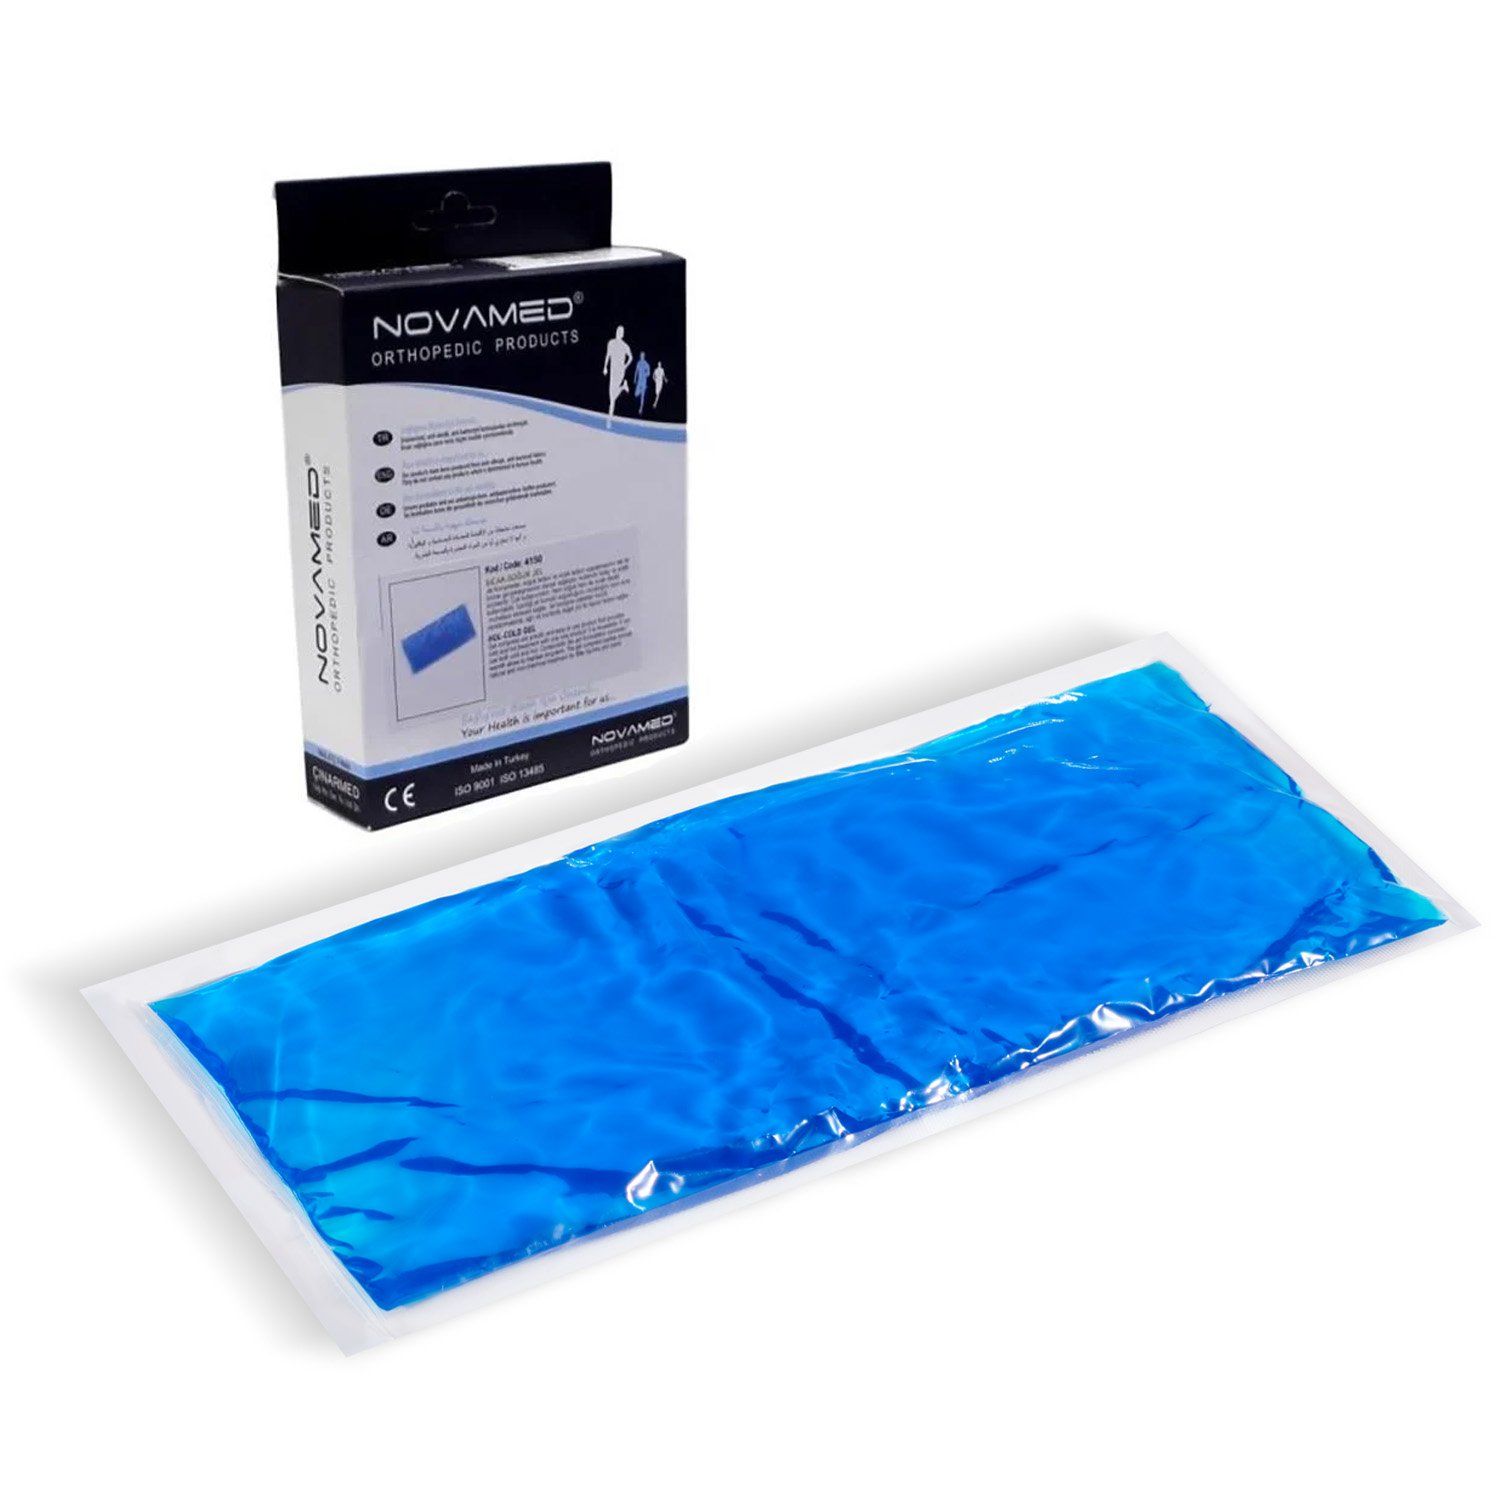 novamed ice pack hot and cold pack per piece for sale